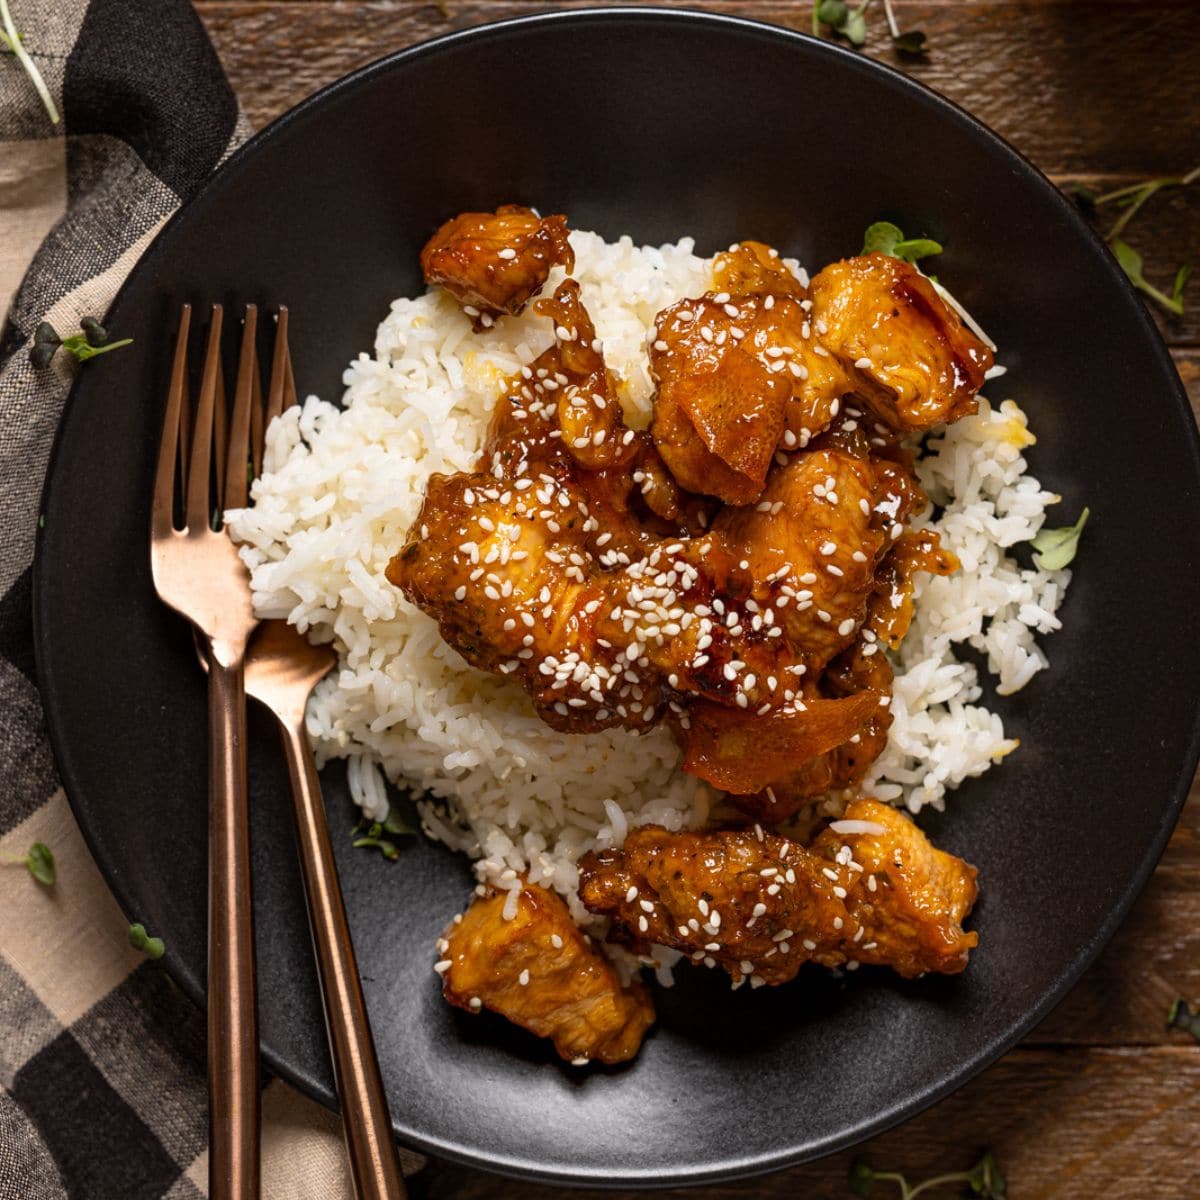 Orange chicken in a black plate with forks and juice.